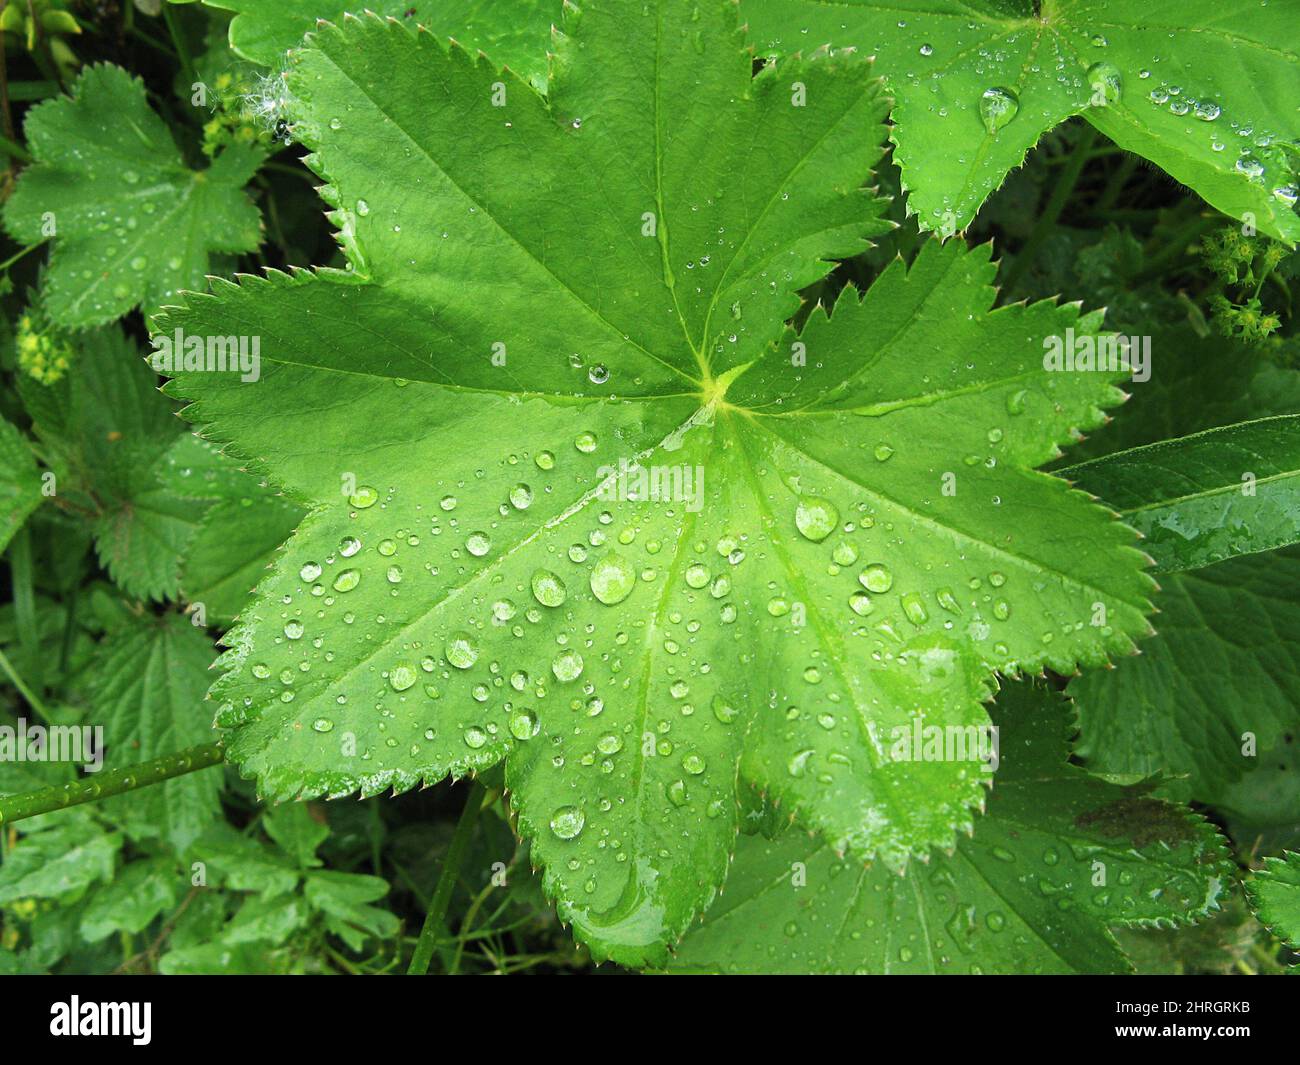 Common lady's mantle (Alchemilla vulgaris), herbaceous perennial. Leaves with a wavy edge covered with water droplets. Stock Photo